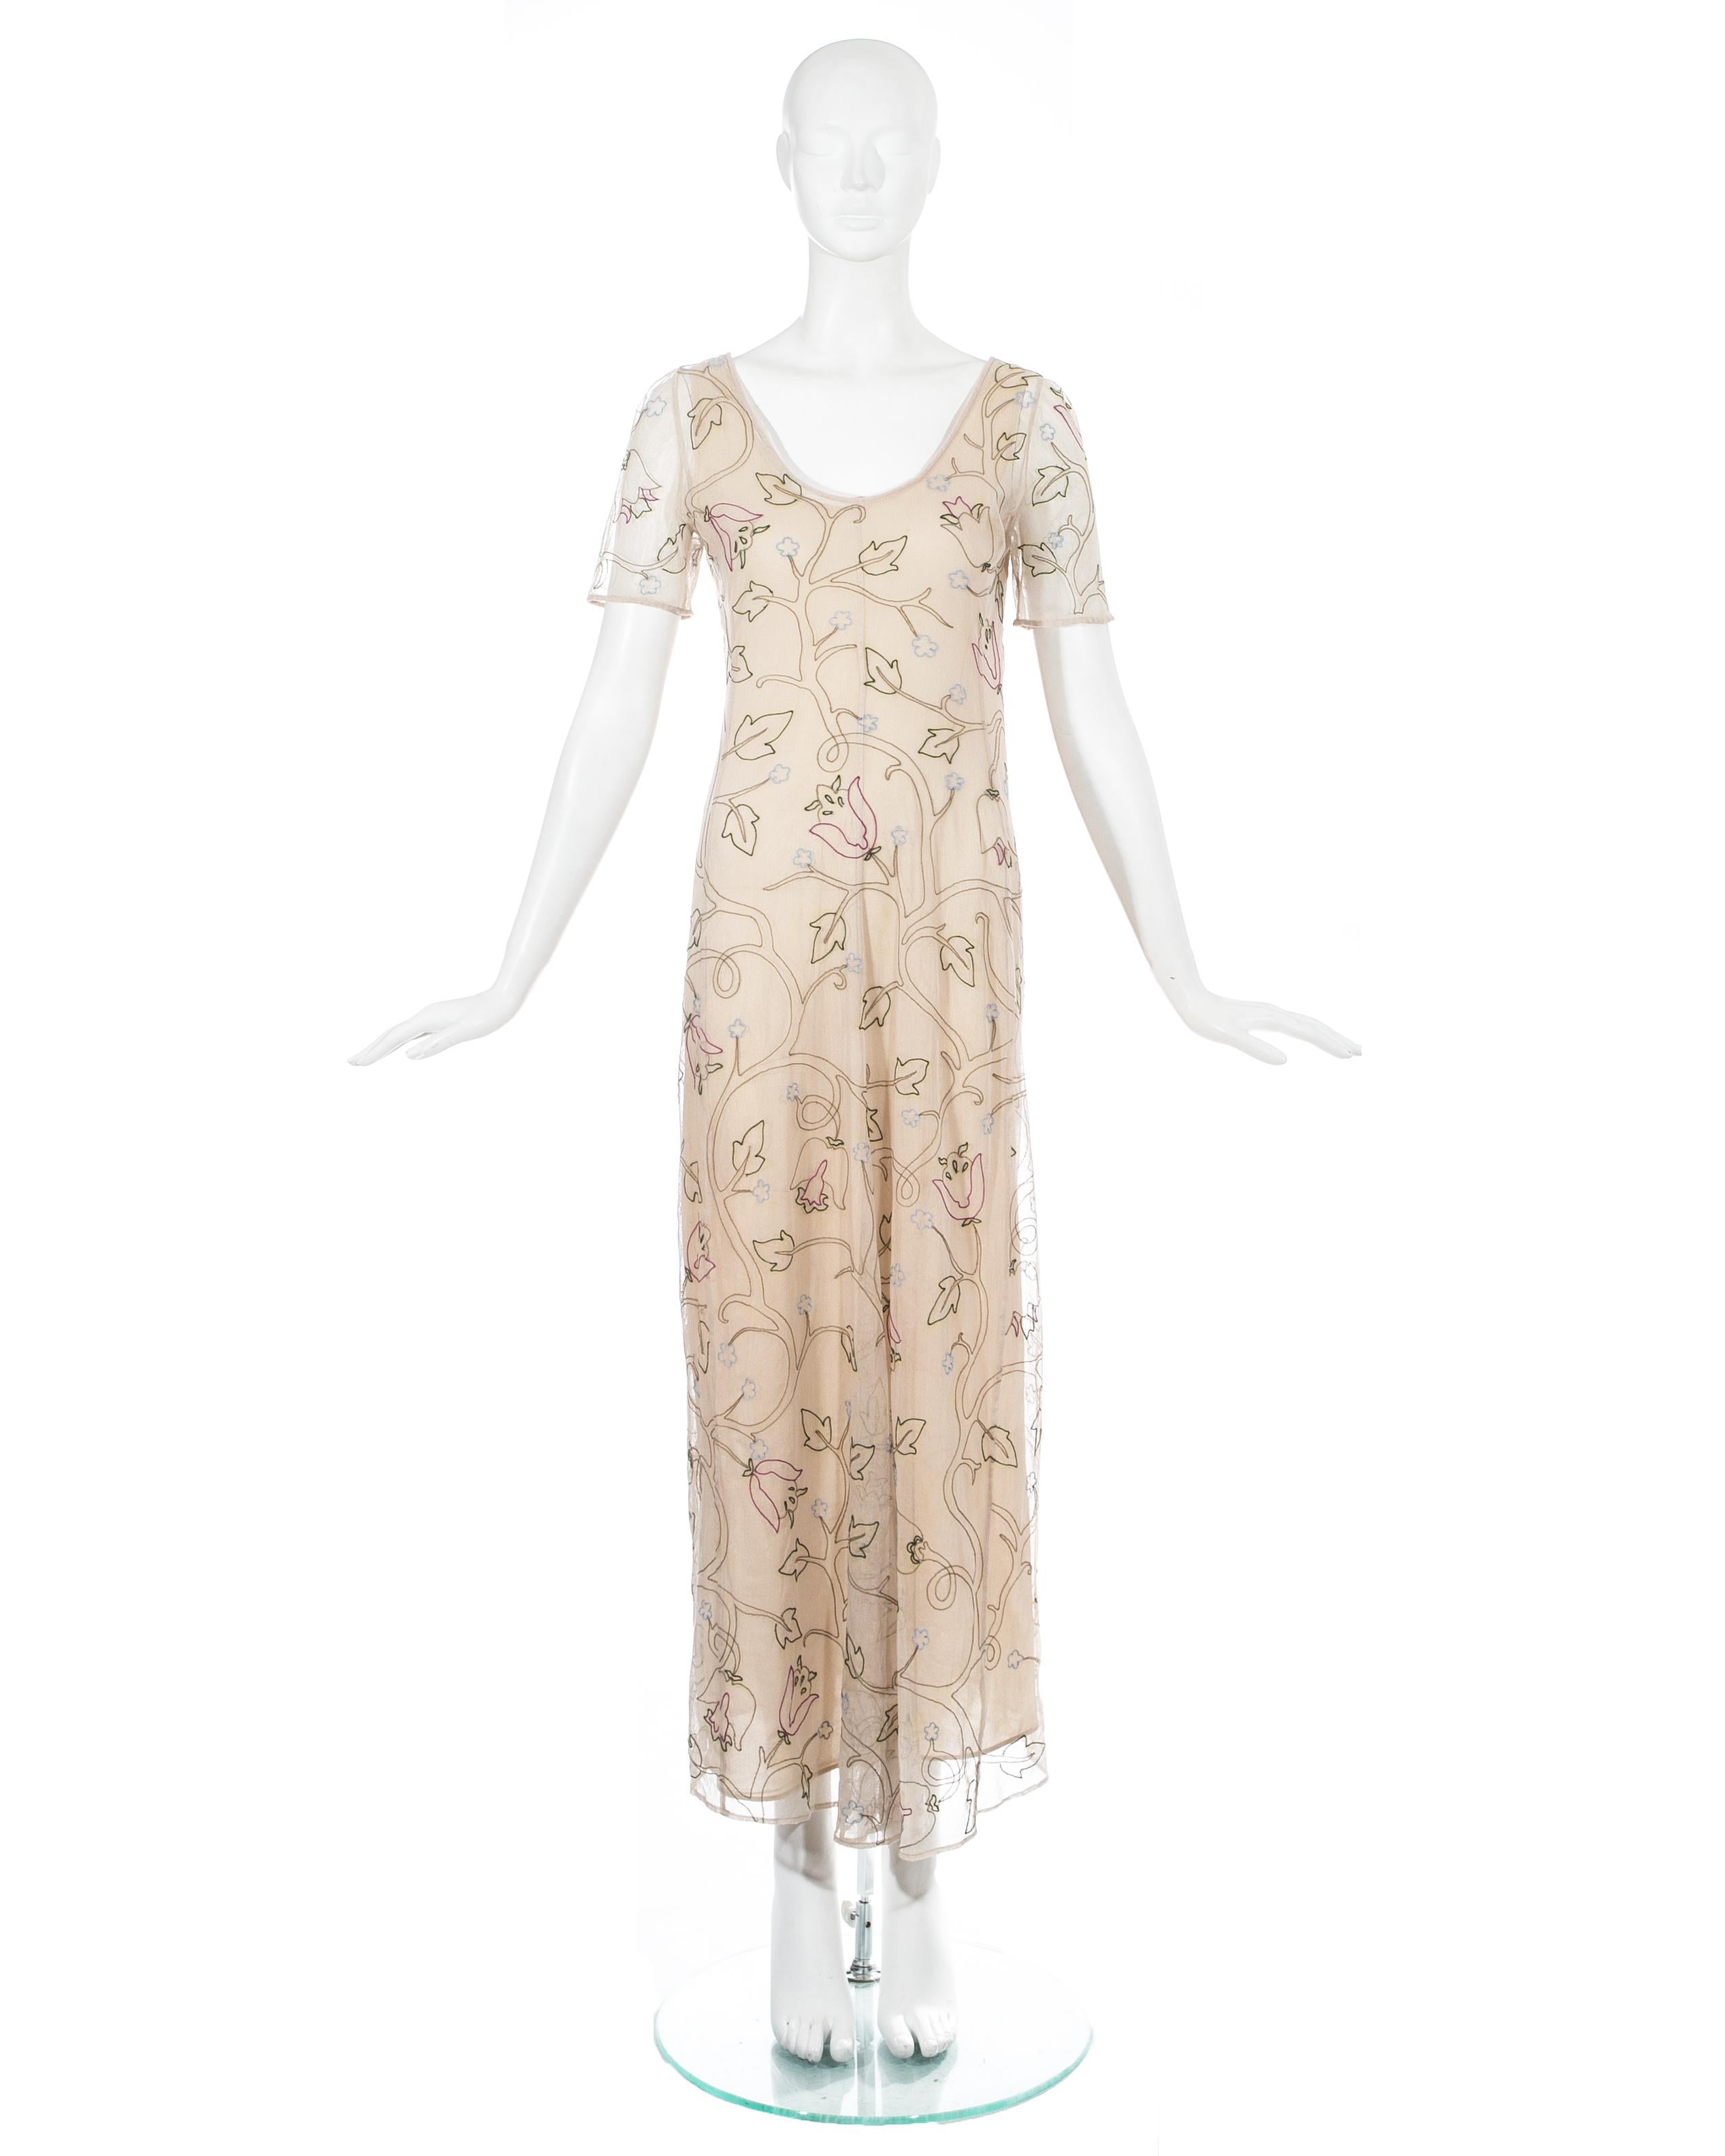 Beige Prada nude mesh evening dress with floral embroidery, ss 1997 For Sale